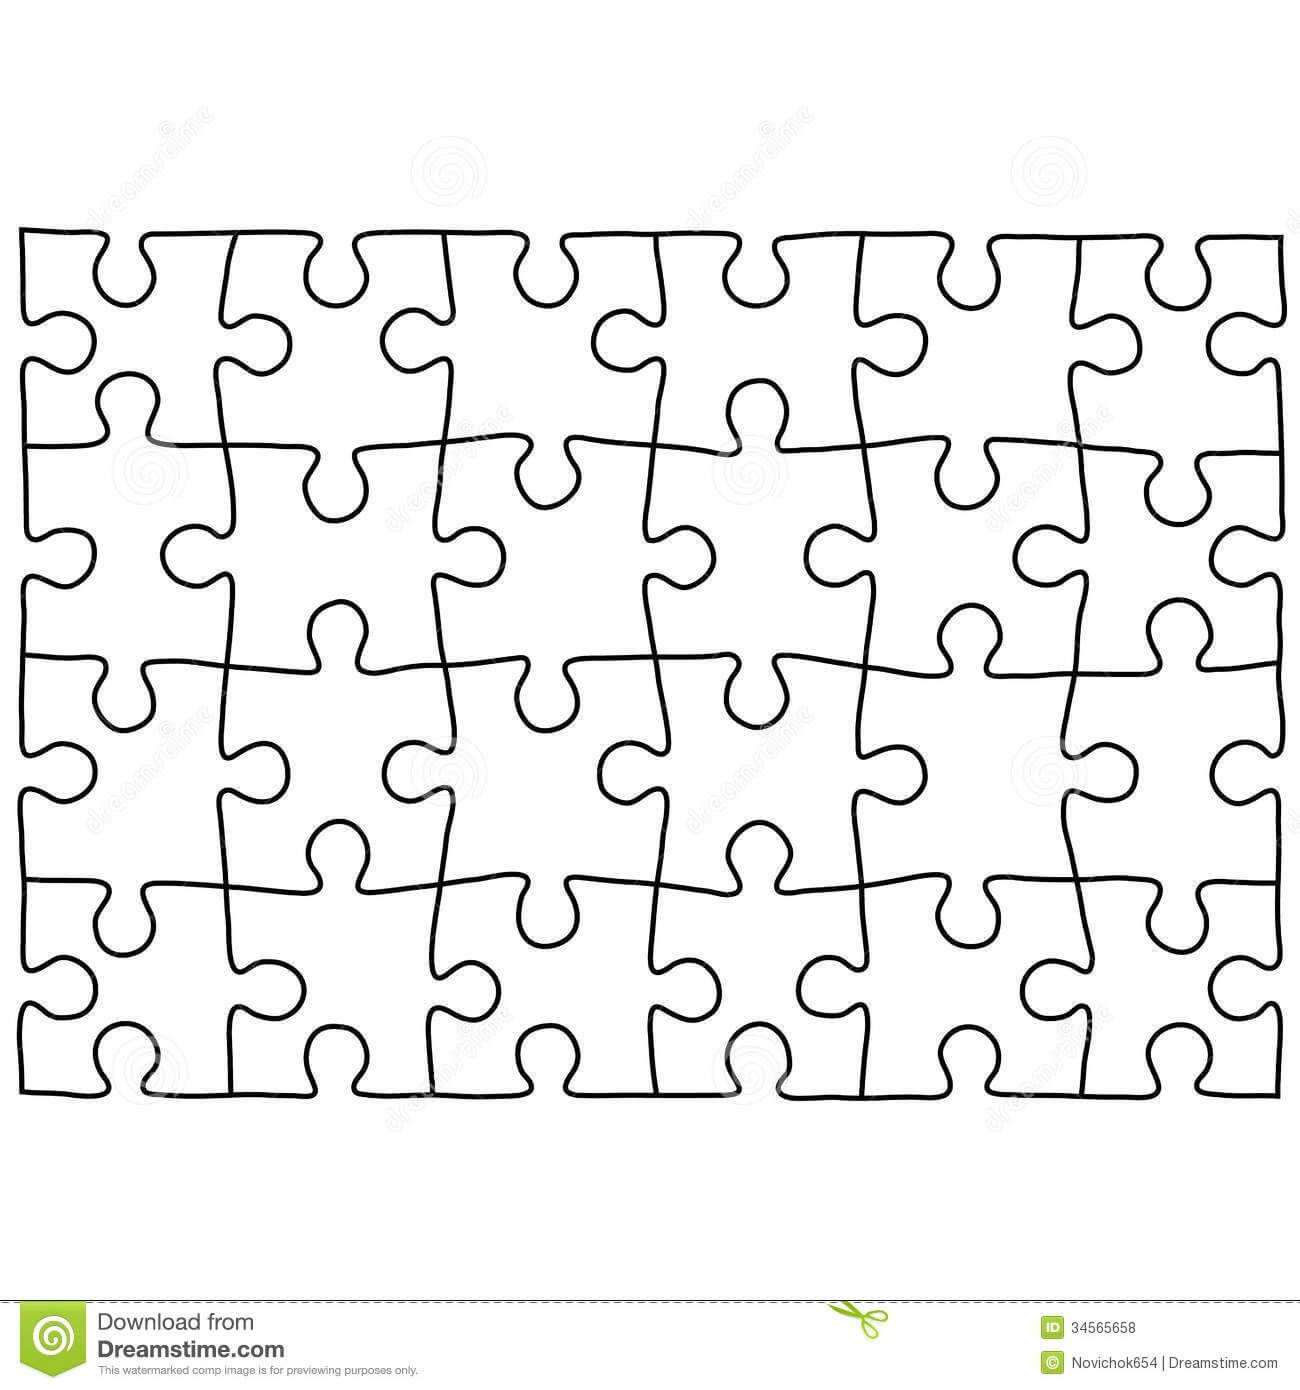 026 Jig Saw Puzzle Template Ideas Astounding Blank Jigsaw Throughout Jigsaw Puzzle Template For Word